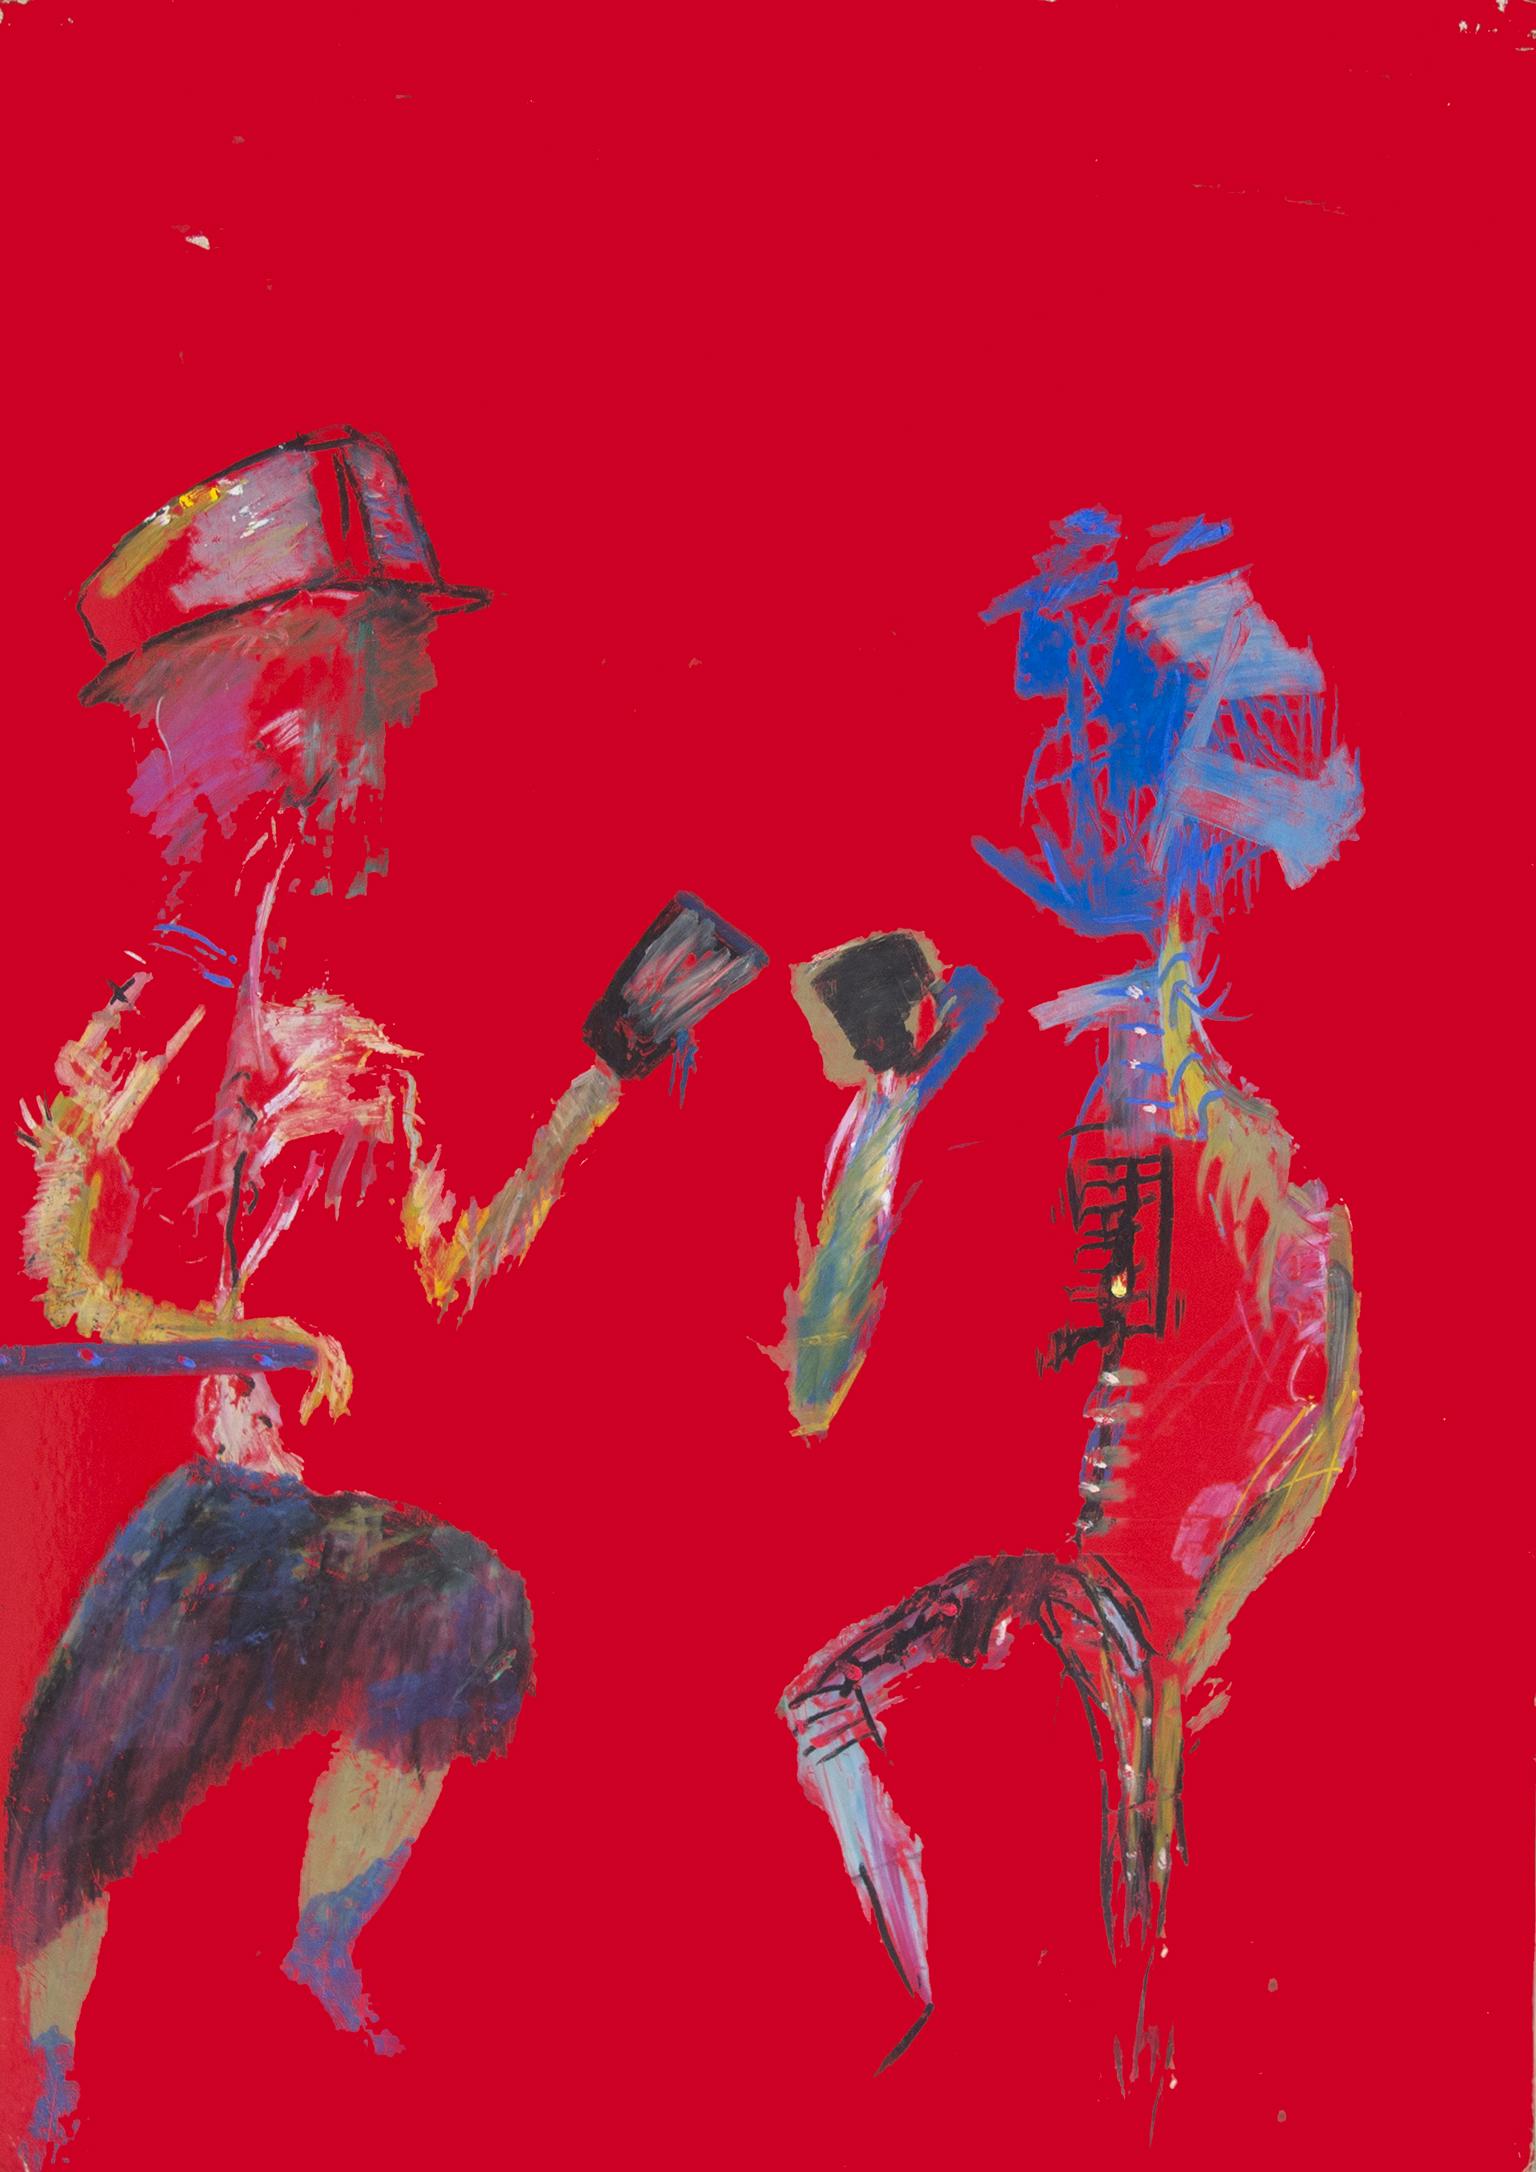 "Better Things to Come" is an original oil pastel drawing on board by Reginald K. Gee. The artist signed the piece on the back. It depicts two figures in conversation against a striking red background, synthesizing the figural with the abstract in a